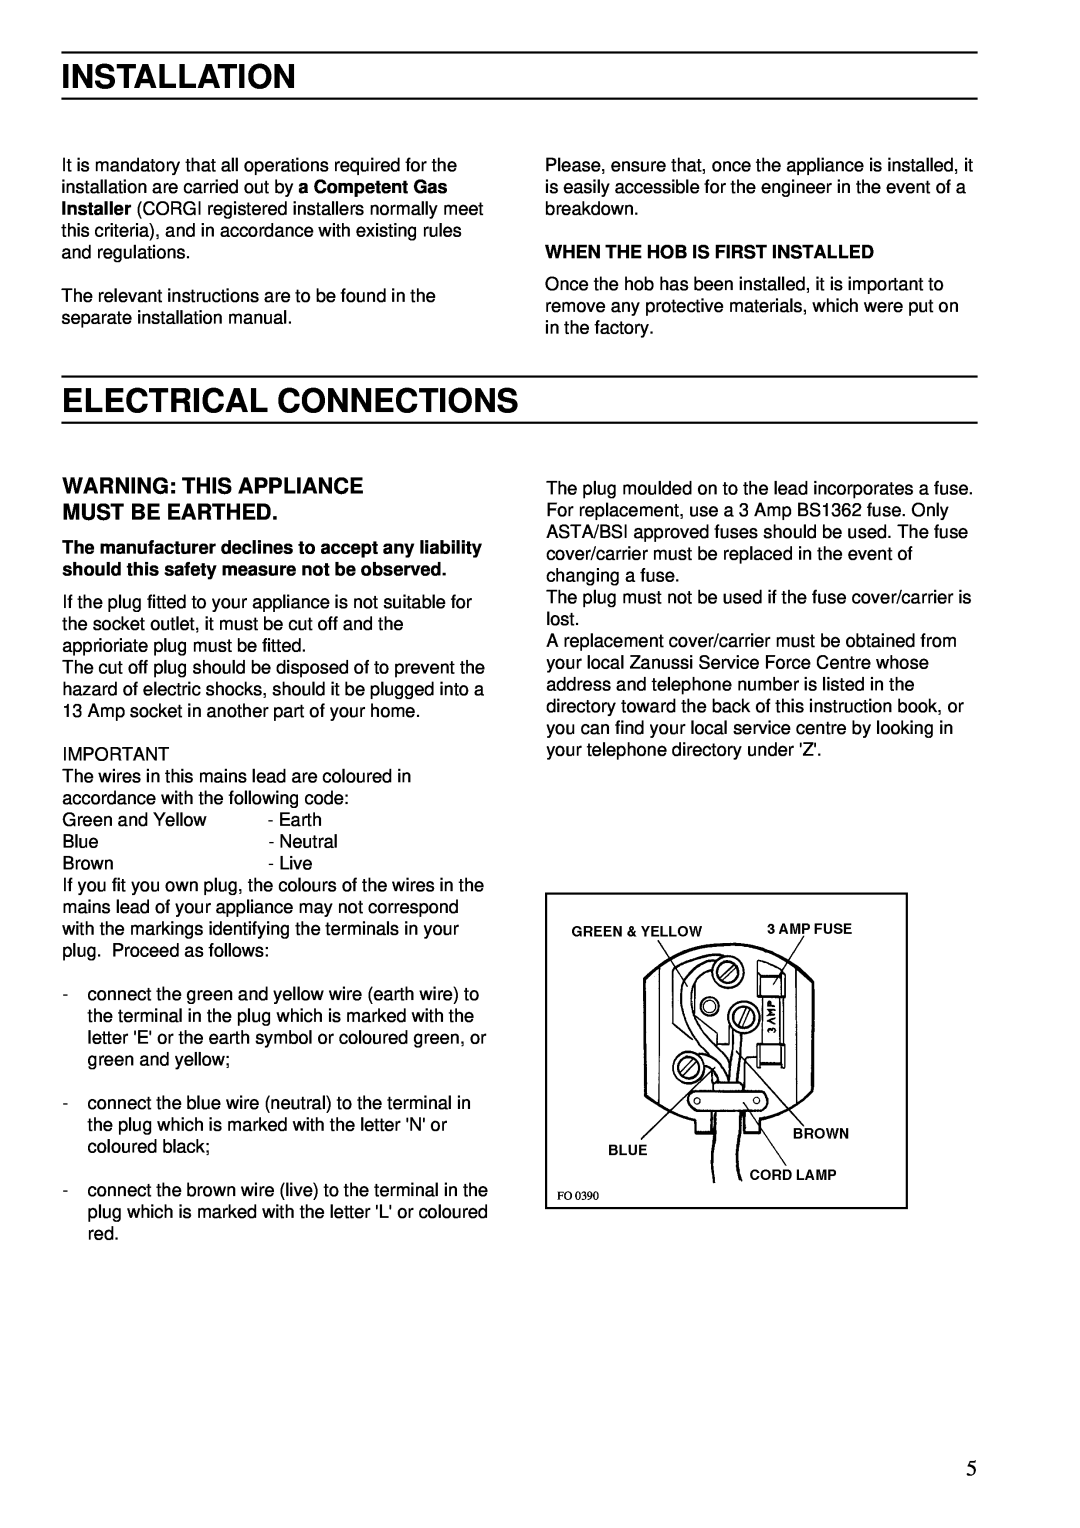 Zanussi ZBG 509 SS manual Installation, Electrical Connections, Warning This Appliance Must Be Earthed 